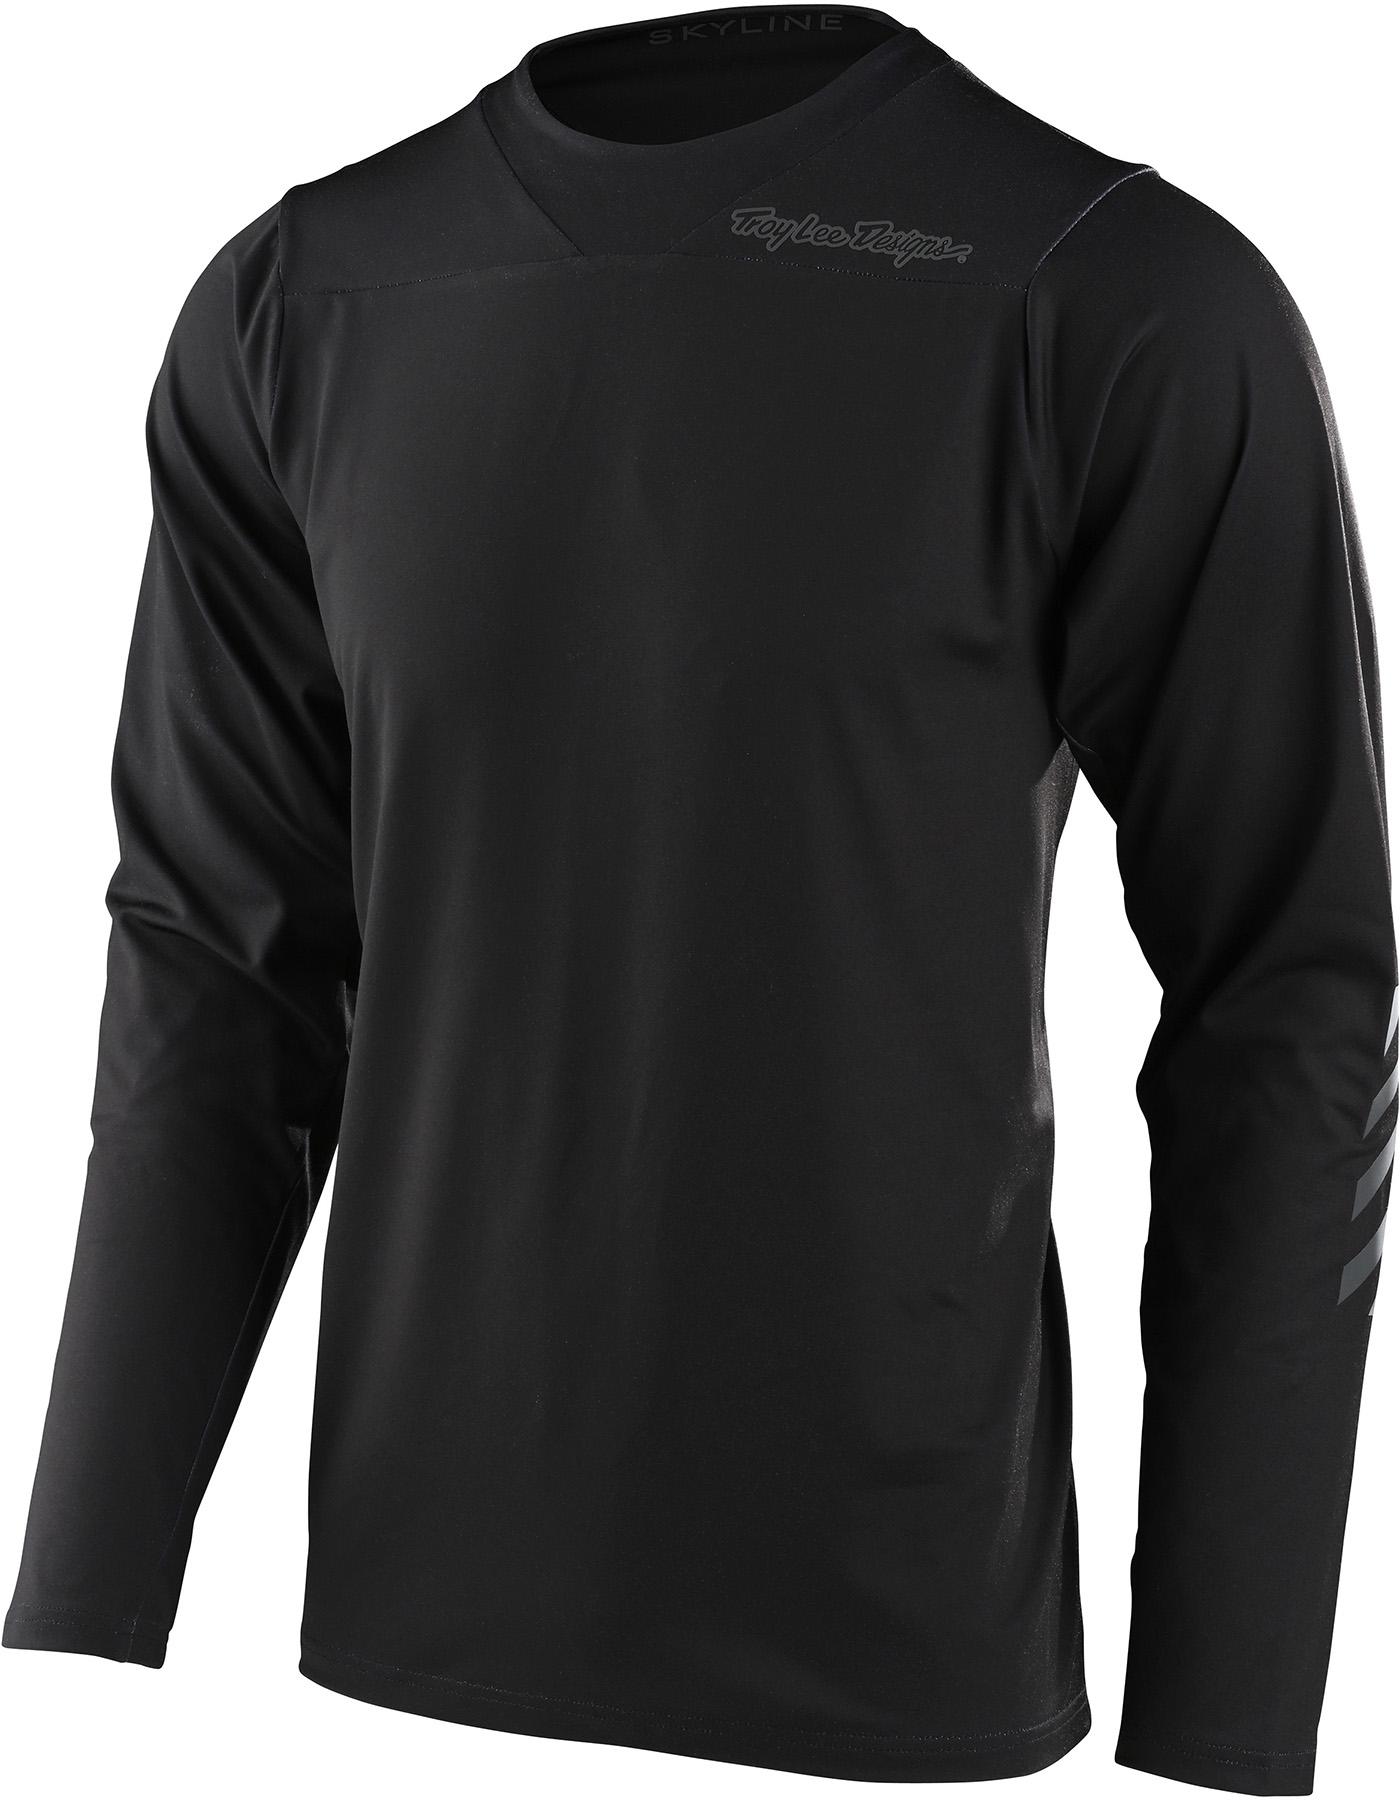 Troy Lee Designs Skyline Chill Cycling Jersey - Black